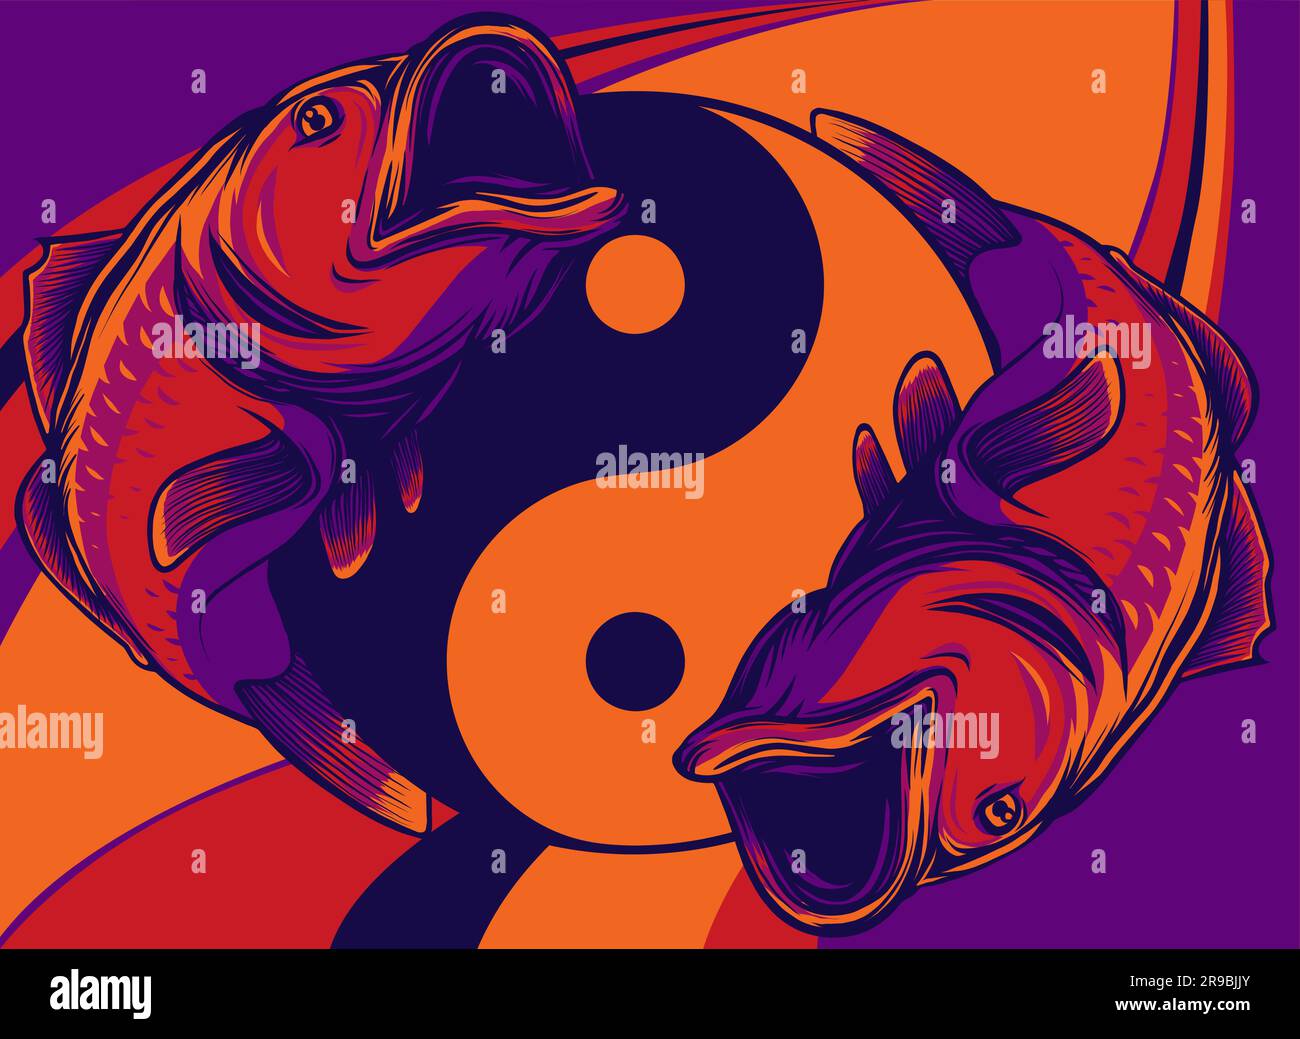 vector illustration of bass fish in colored background Stock Vector